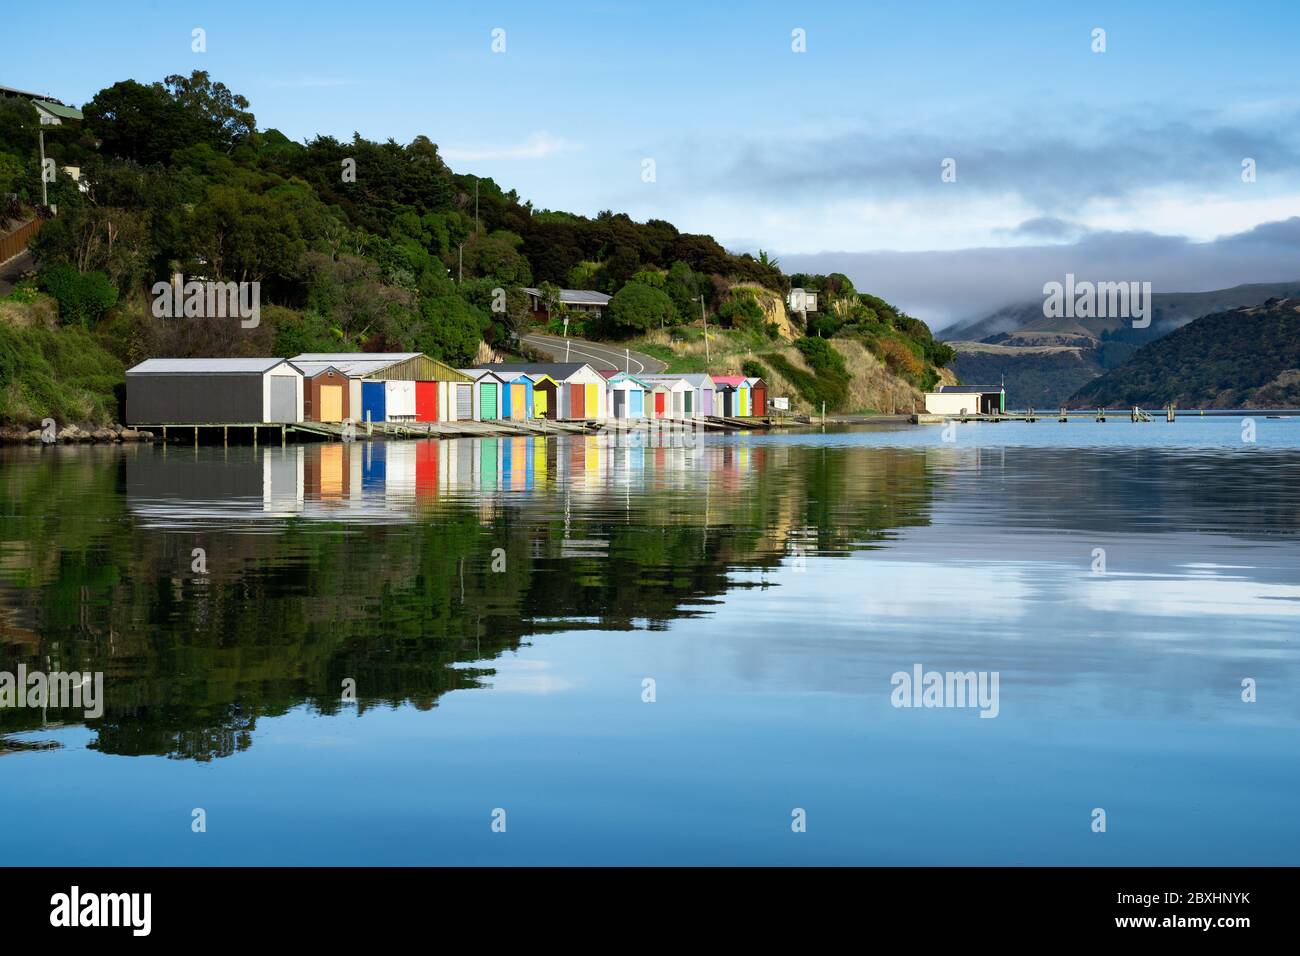 Colorful Boat Sheds with beautiful reflection on daytime  at Duvauchelle, Akaroa Harbour on Banks Peninsula in South Island, New Zealand. Stock Photo